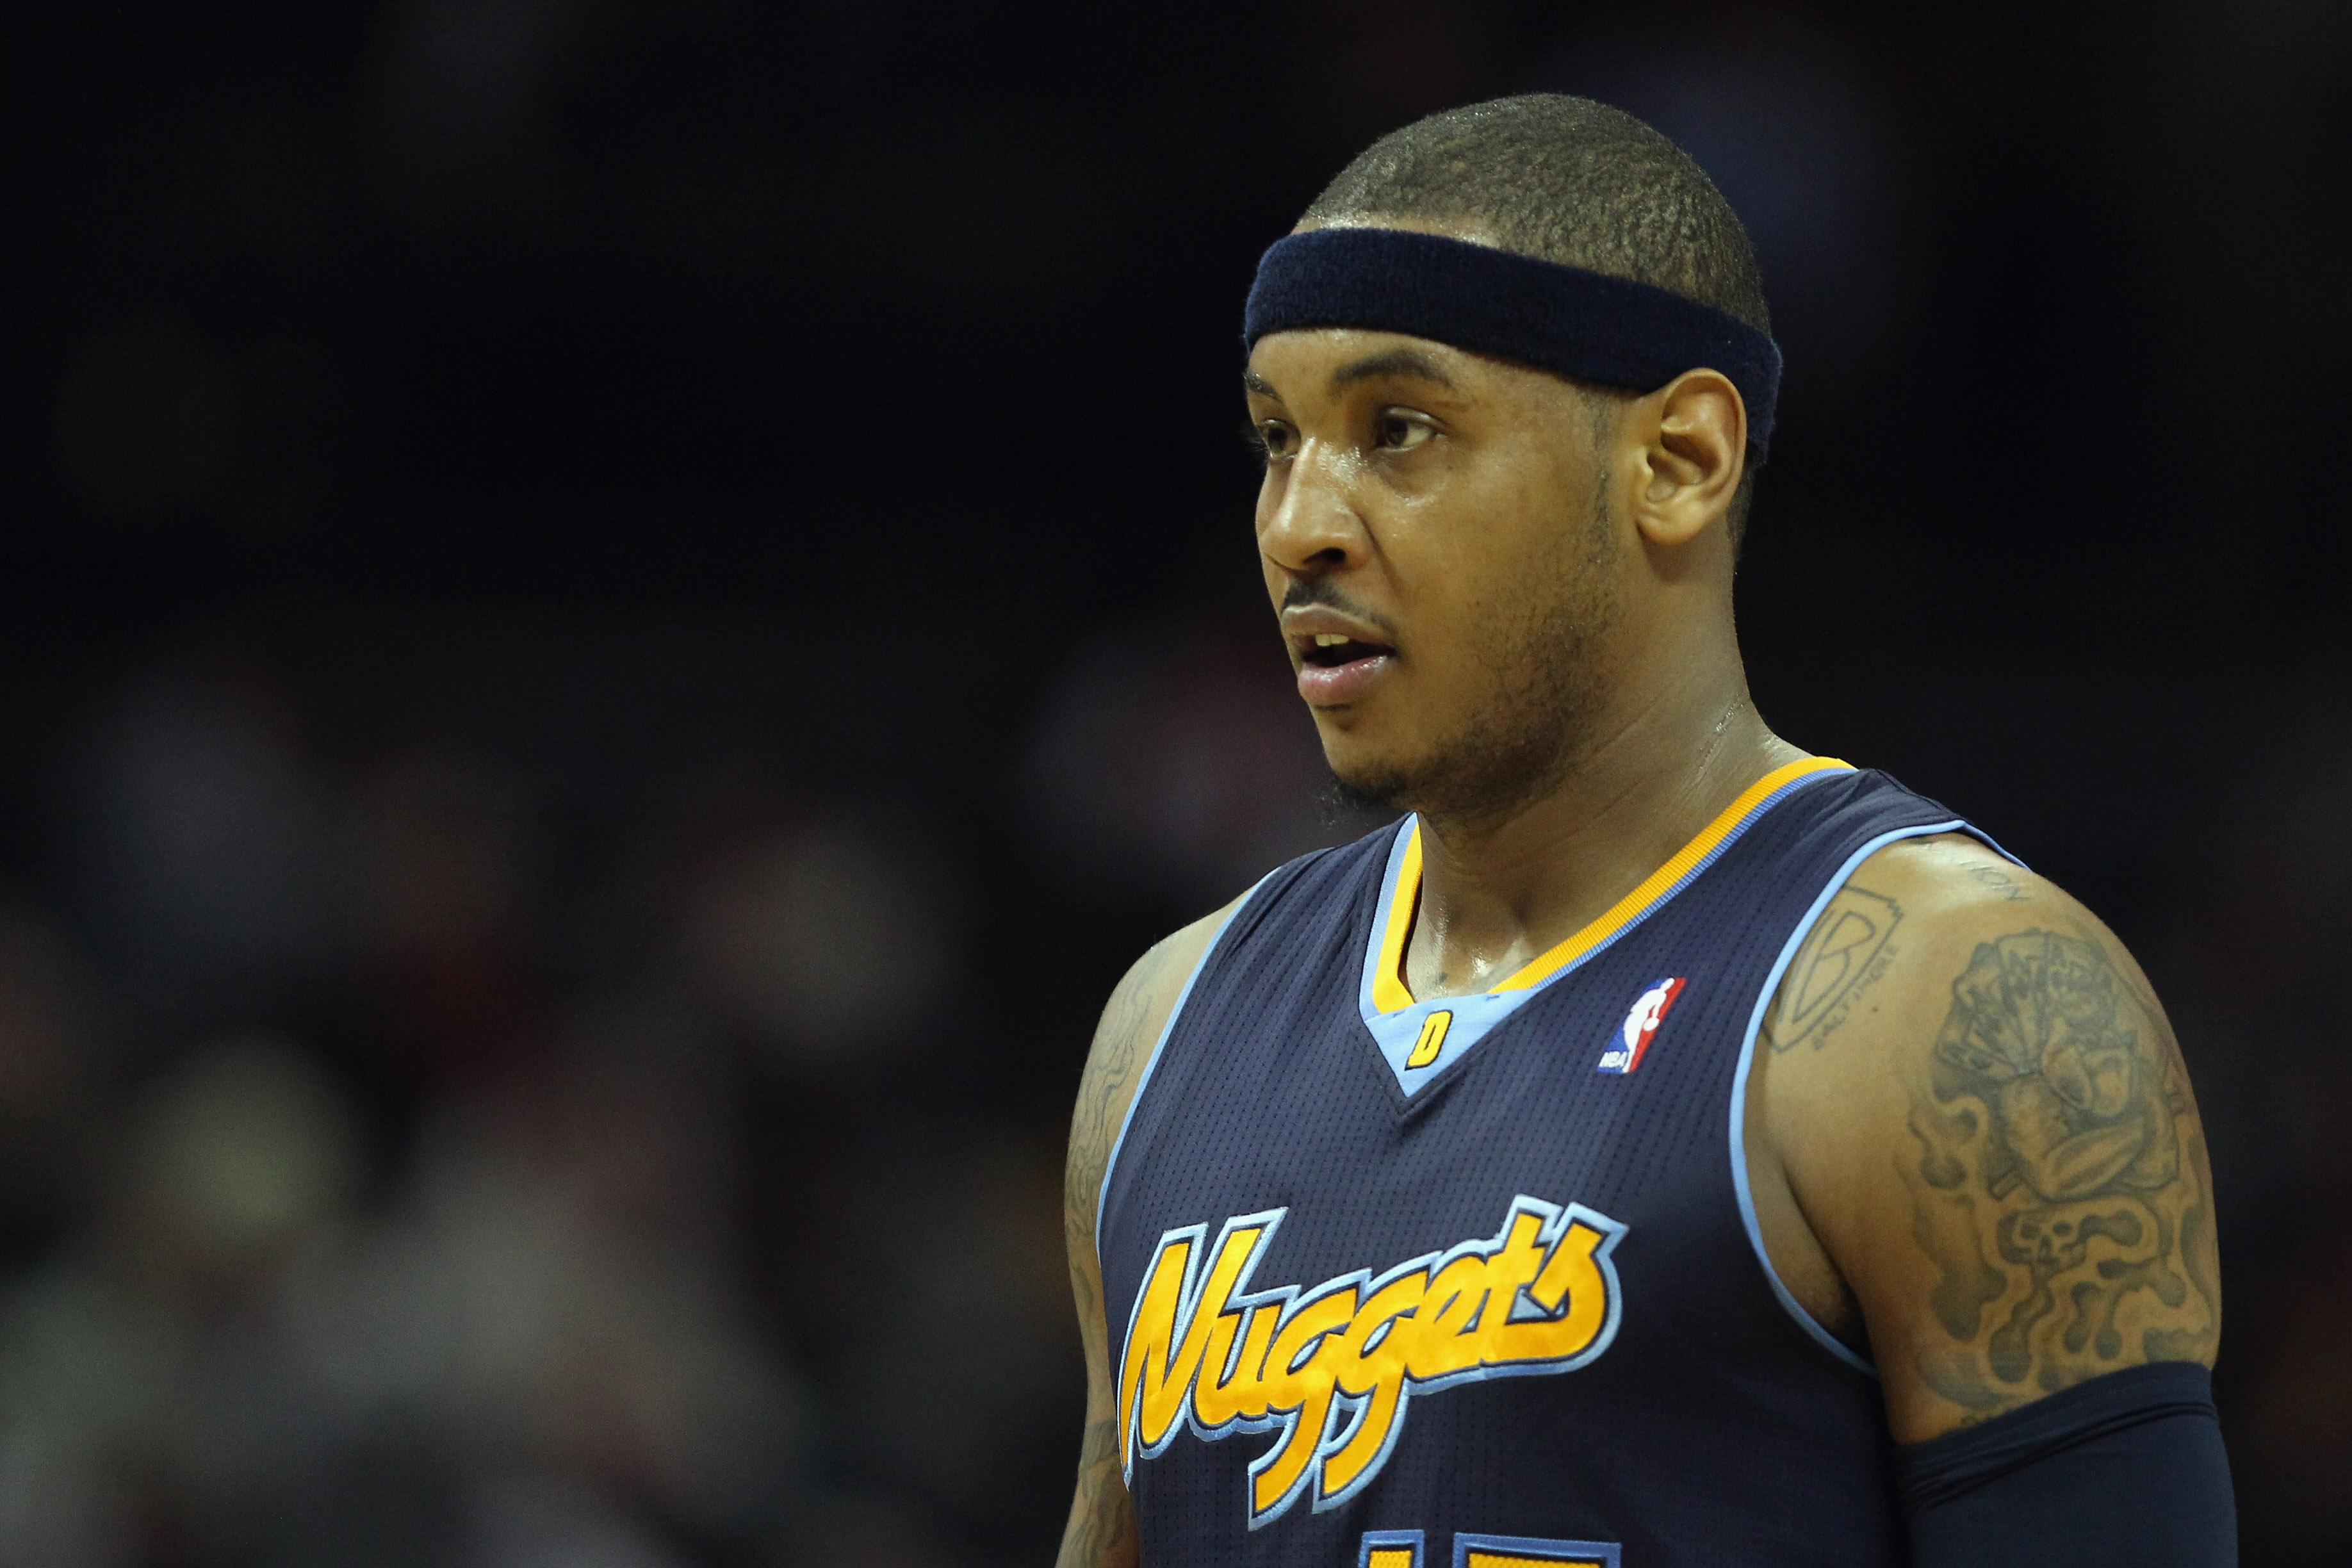 CHARLOTTE, NC - DECEMBER 07:  Carmelo Anthony #15 of the Denver Nuggets watches on against the Charlotte Bobcats during their game at Time Warner Cable Arena on December 7, 2010 in Charlotte, North Carolina.  NOTE TO USER: User expressly acknowledges and